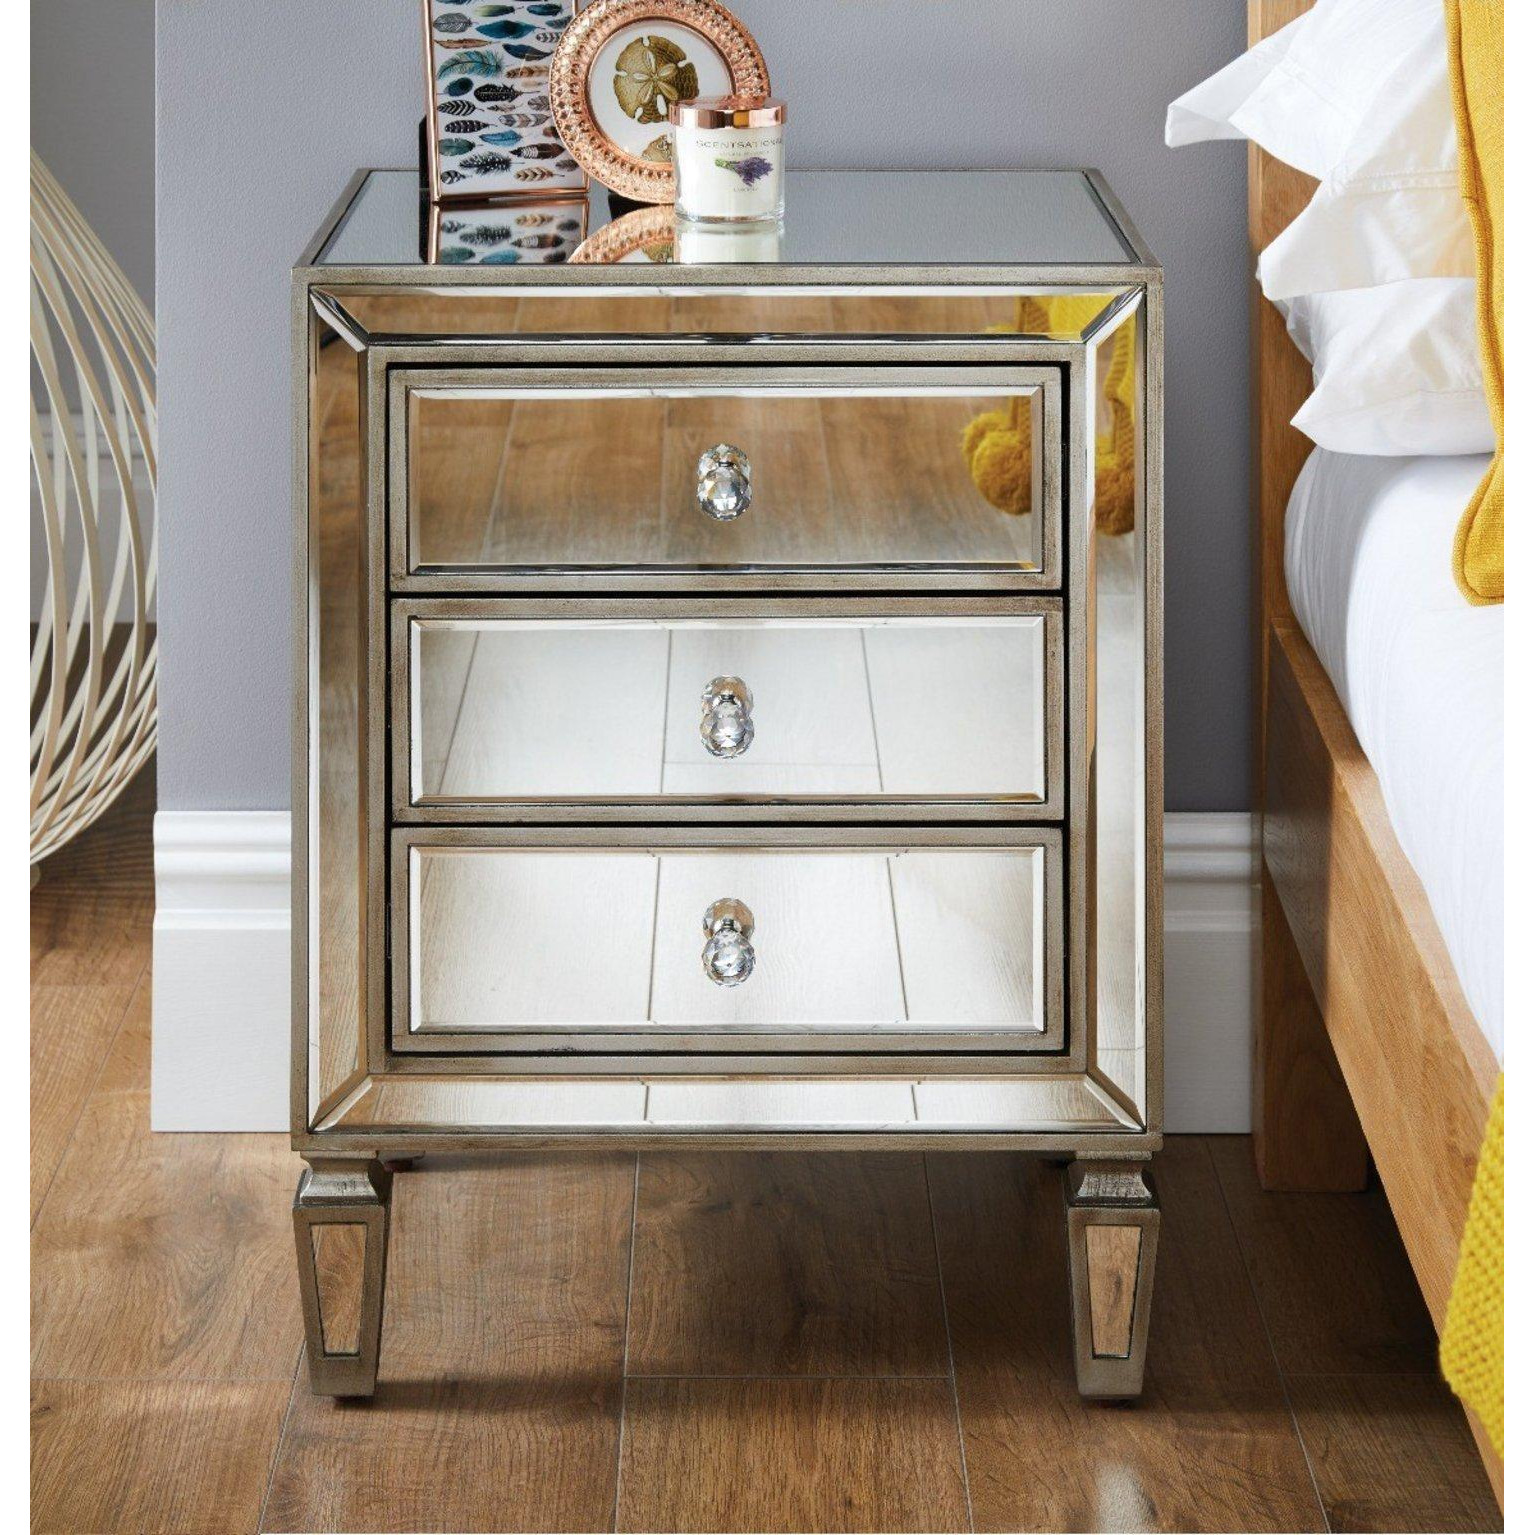 Venice Contemporary 3 Drawer Silver Framed Mirrored Bedside TableWith Crystaline Shaped Handles - image 1